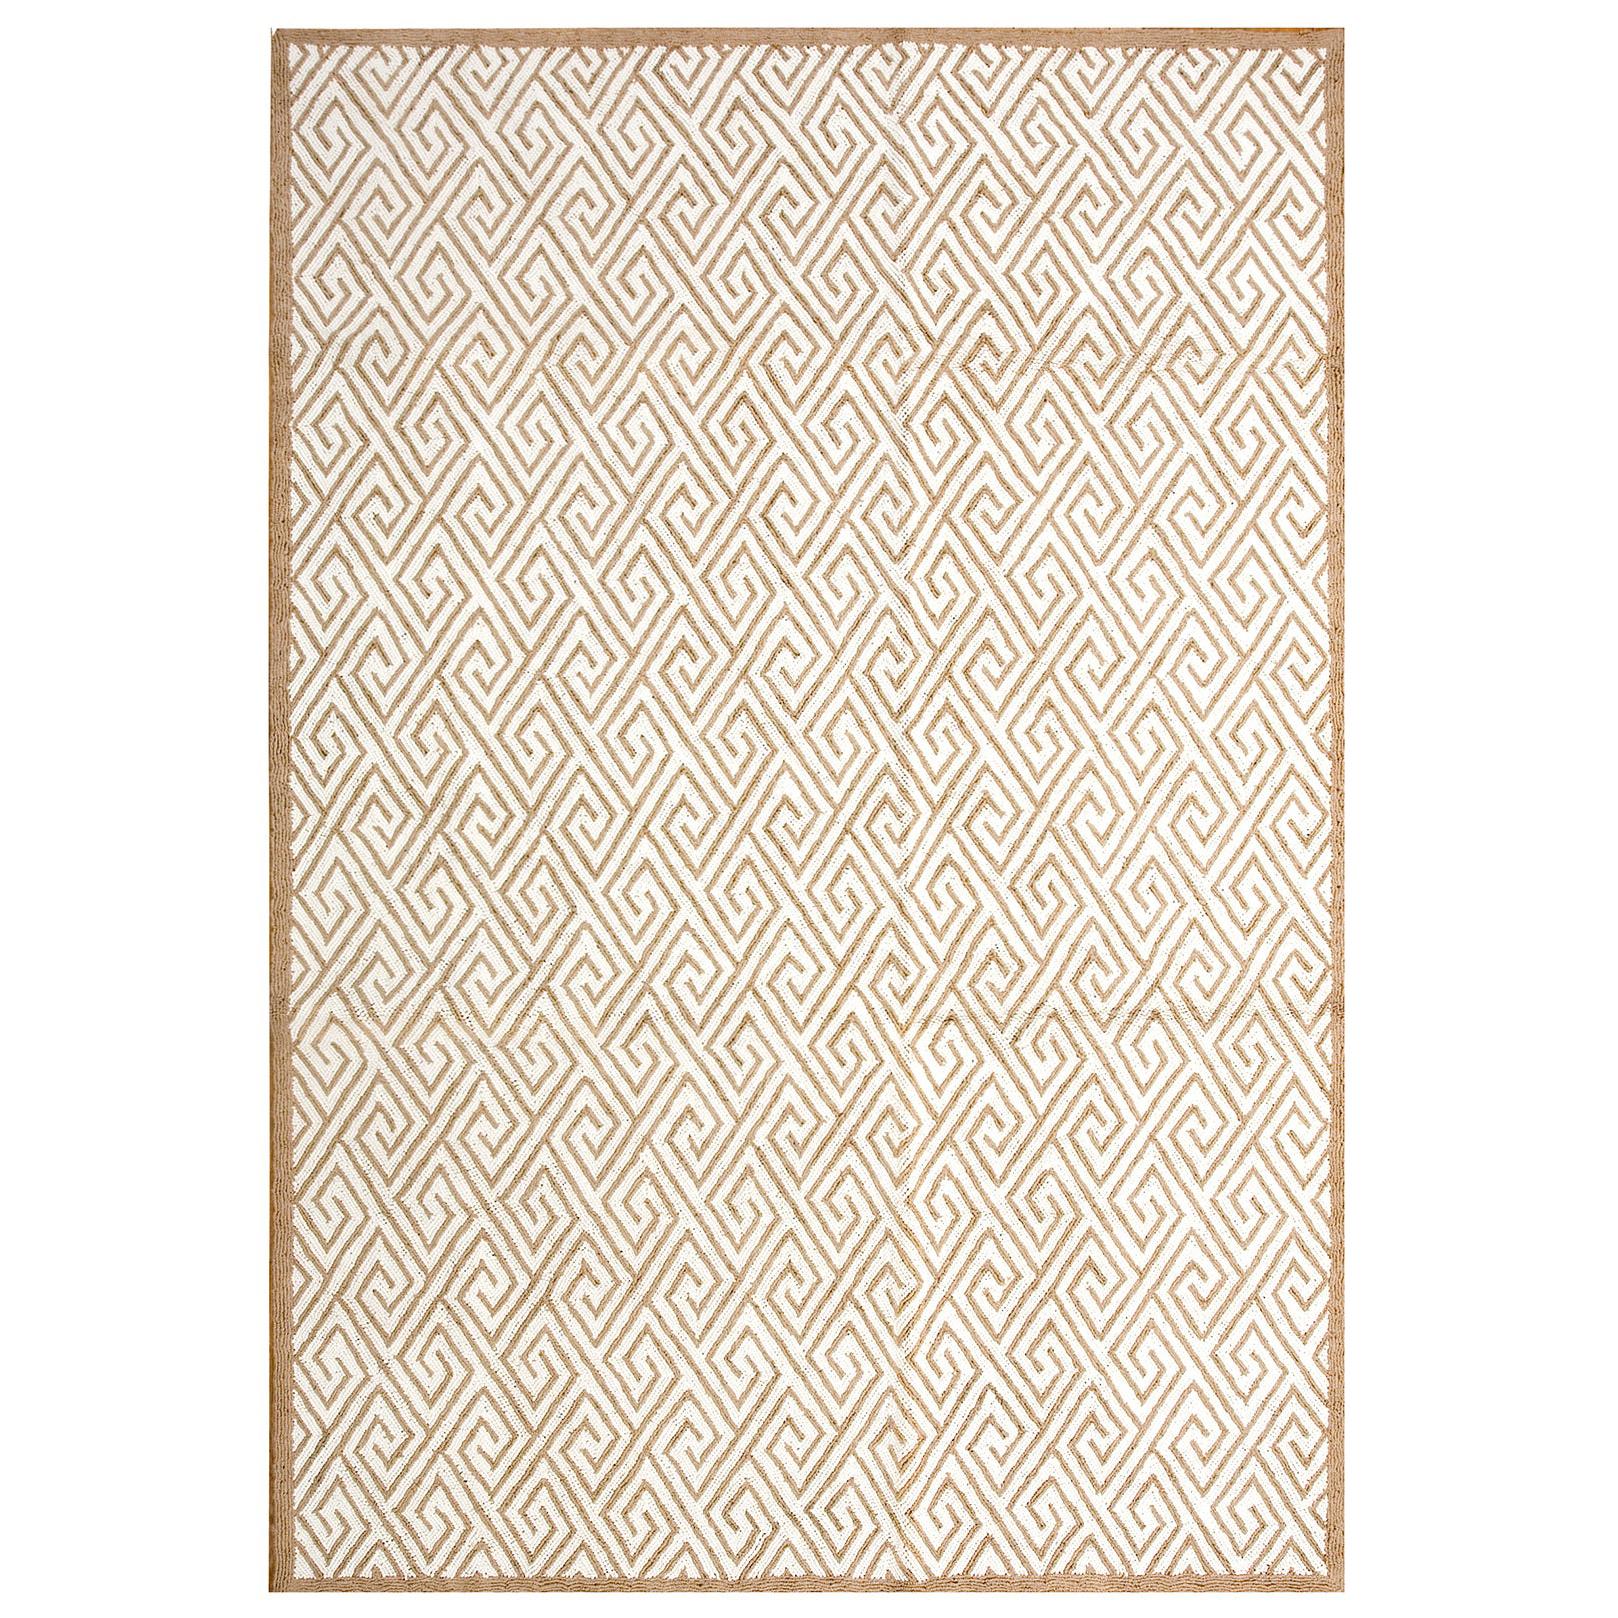 Contemporary  Cotton Hooked Rug 8' 0" x 10' 0" 